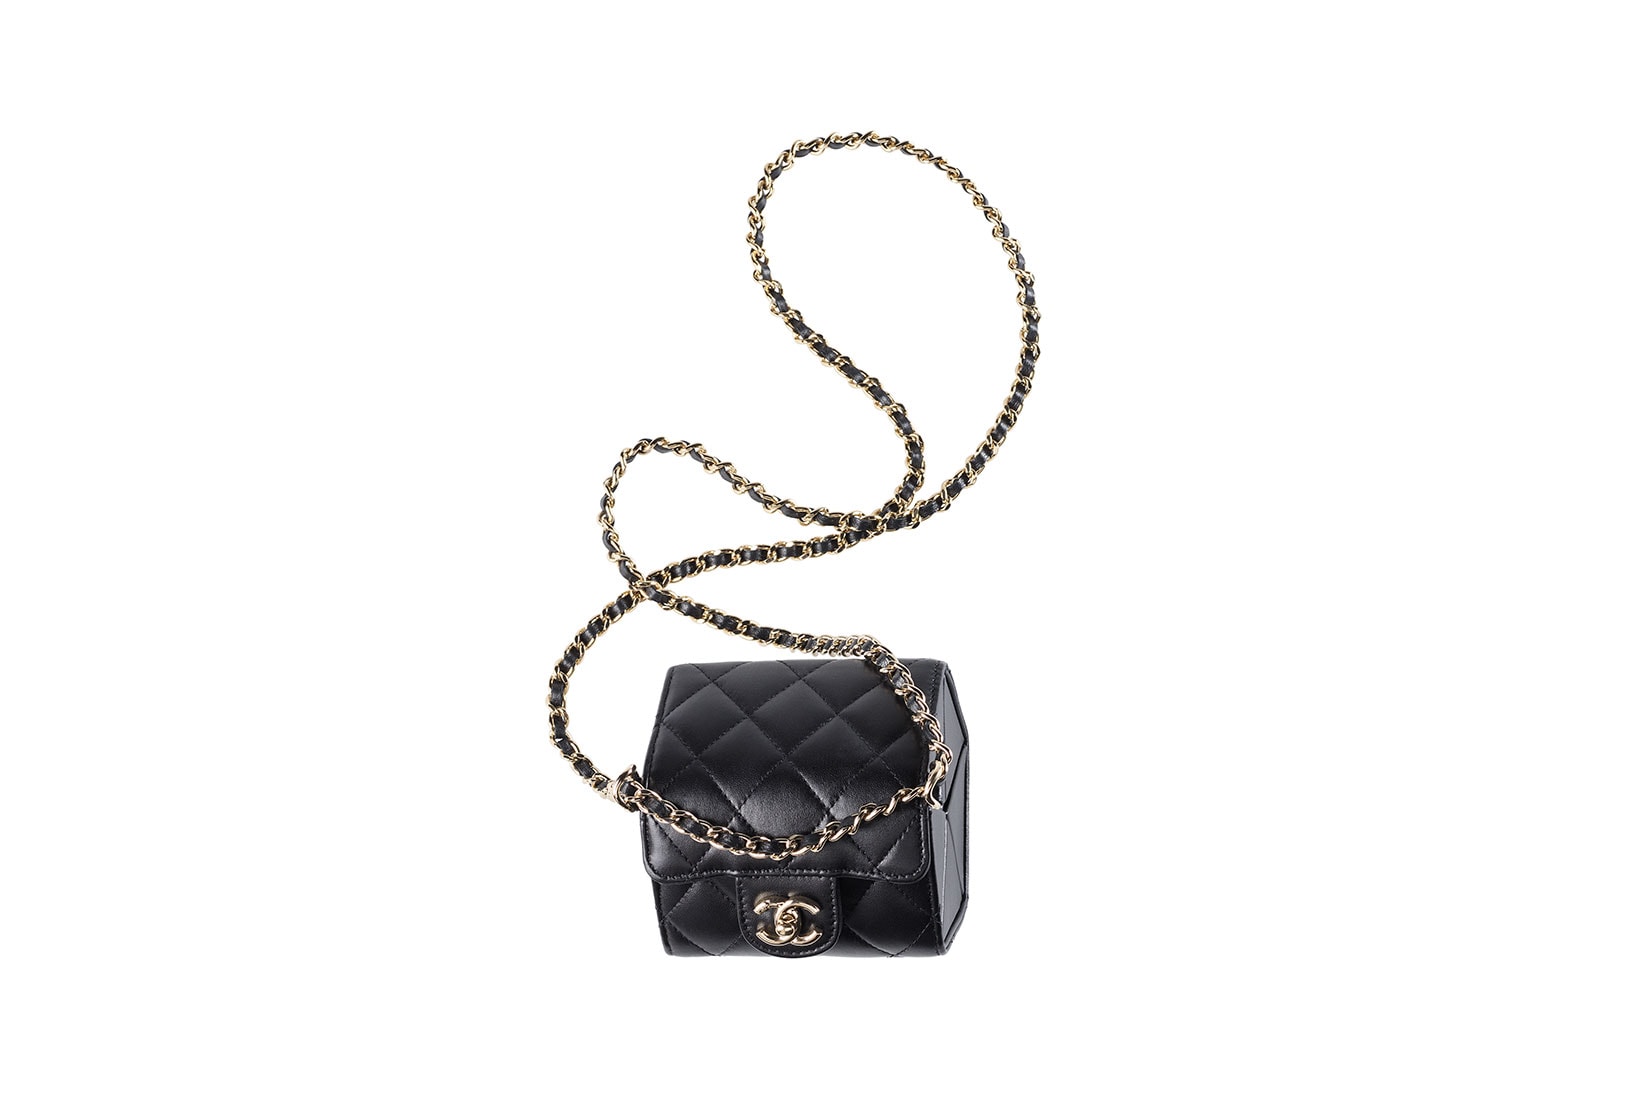 Chanel Métiers D’Art Collection Small Leather Goods Minaudiere Black Mini Bag